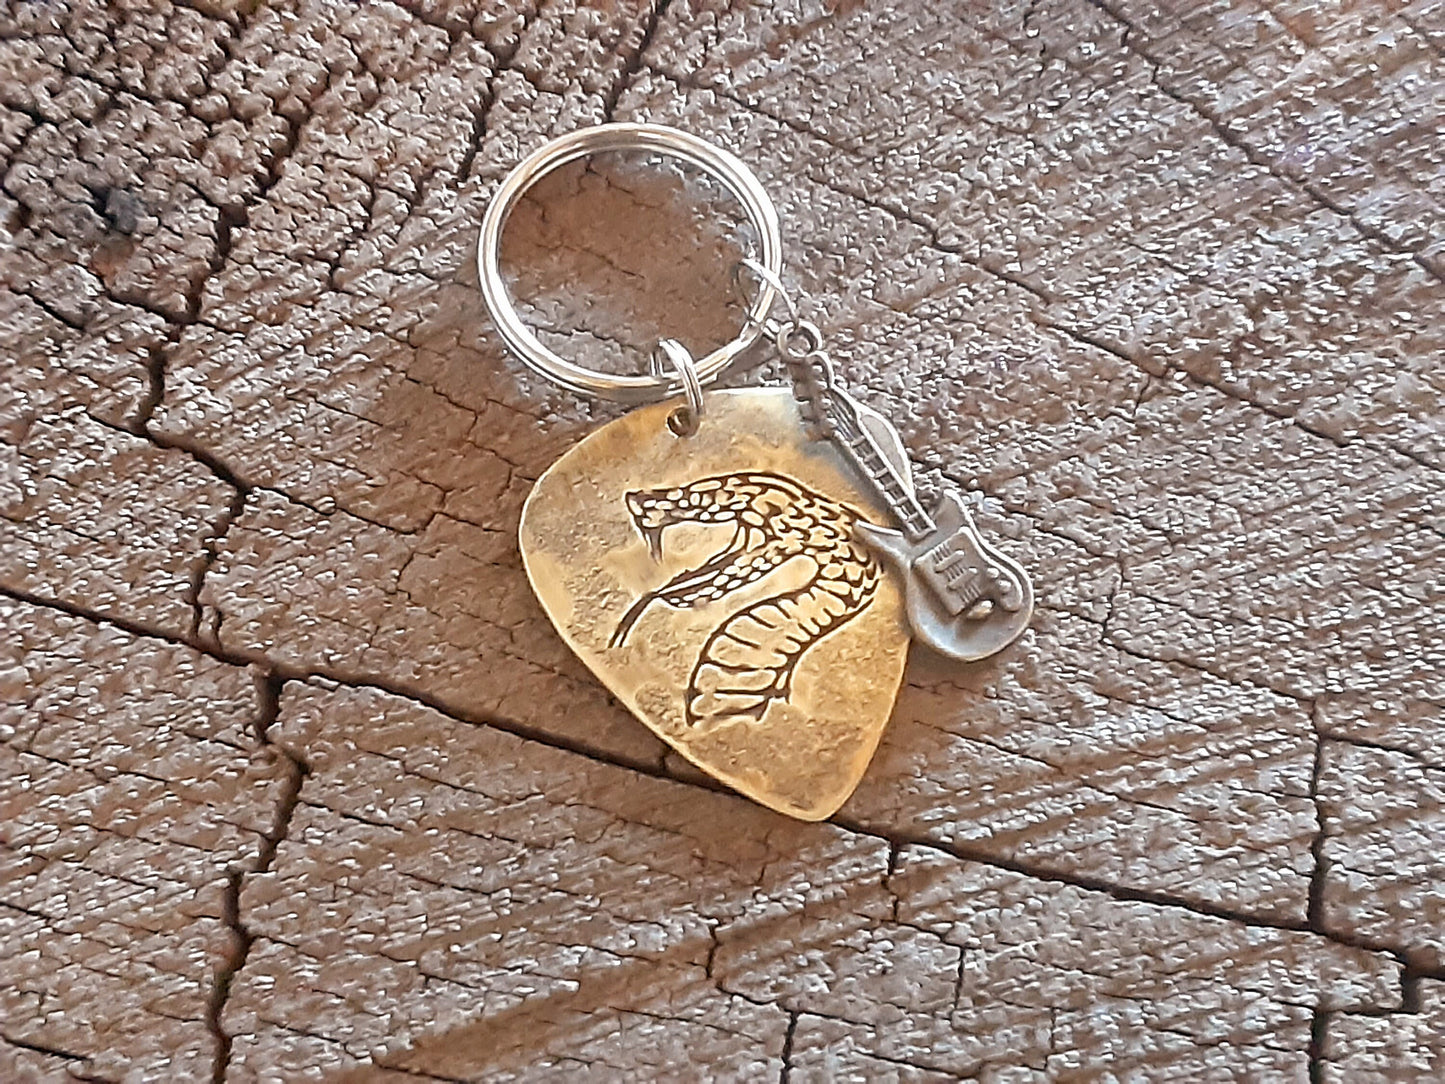 Snake design on brass guitar pick key chain and a small accent guitar charm